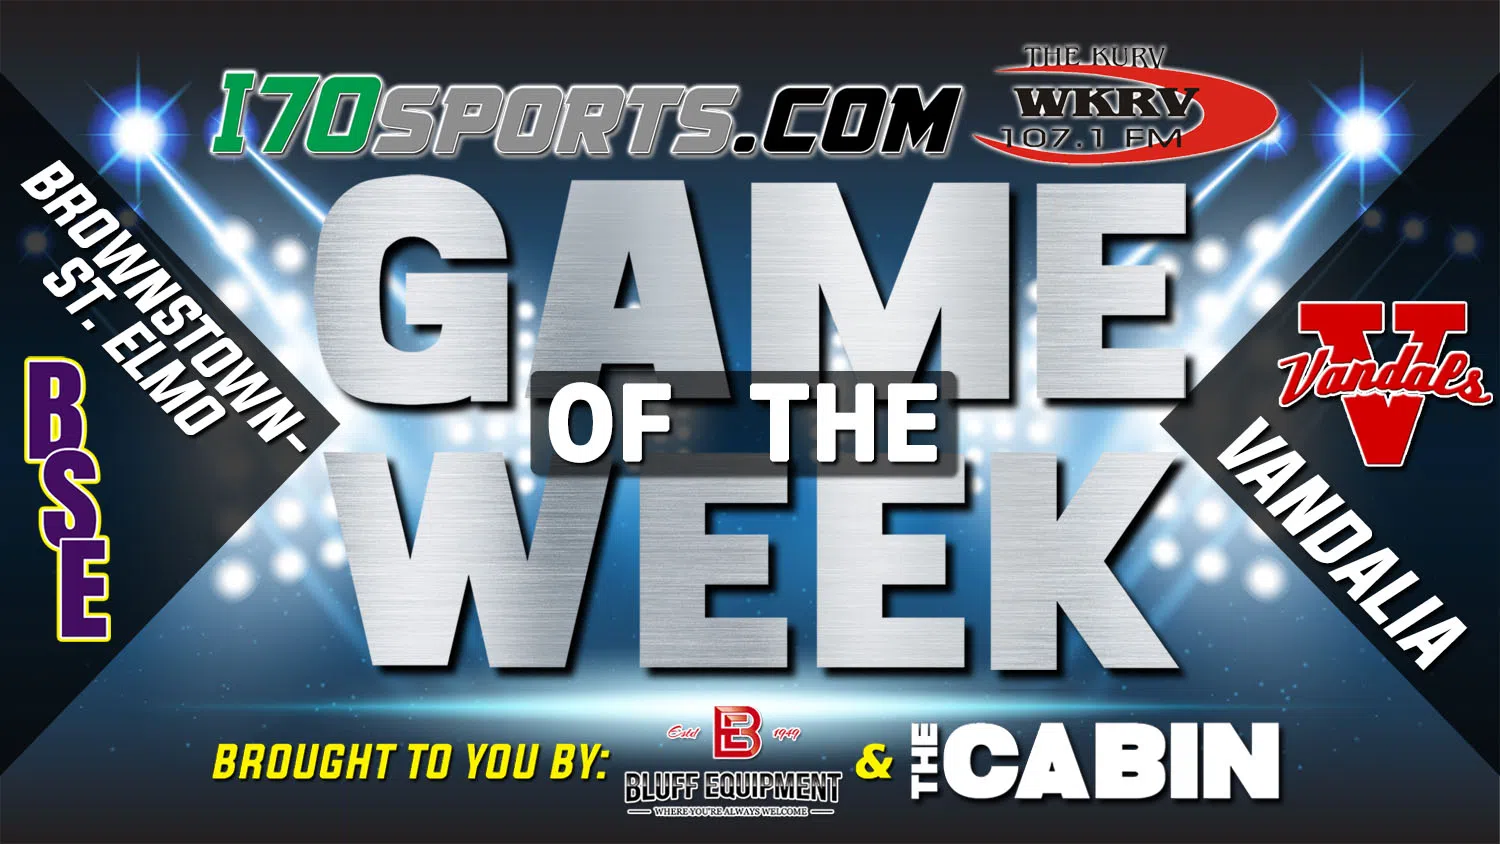 WKRV/I70sports Game of the Week today---BSE at Vandals